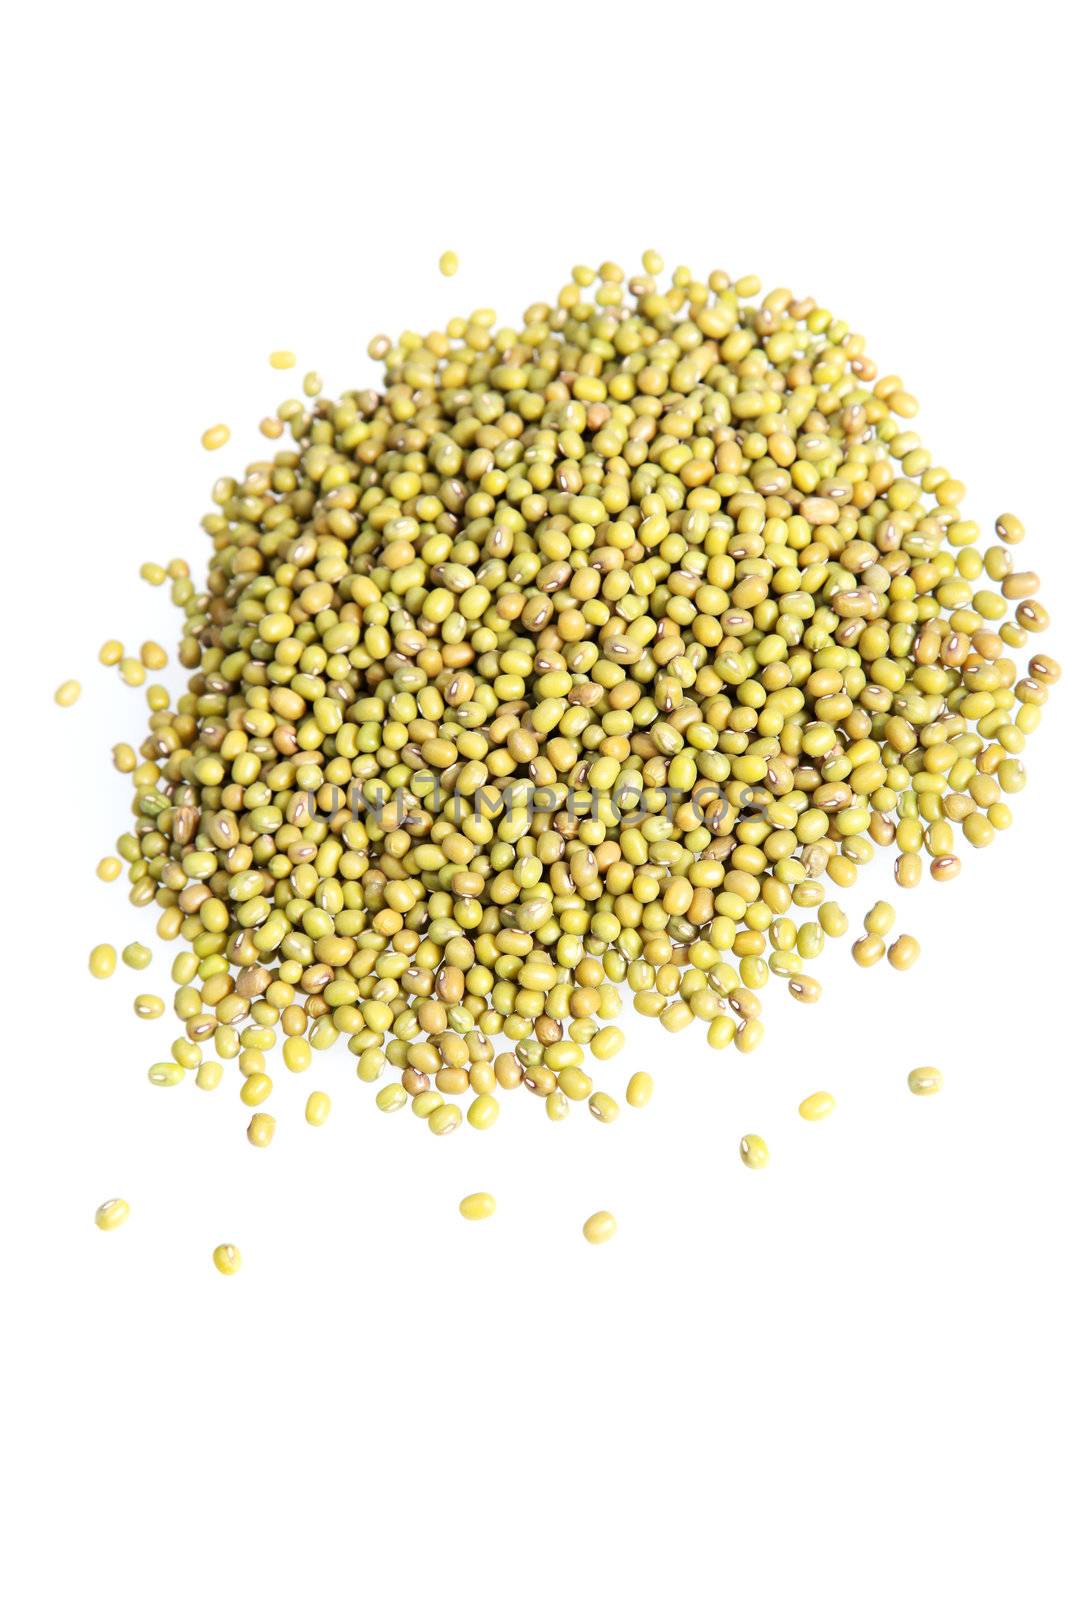 Pile of raw chickpeas isolated on a white background for use as an ingredient in vegetarian cooking as they are high in protein